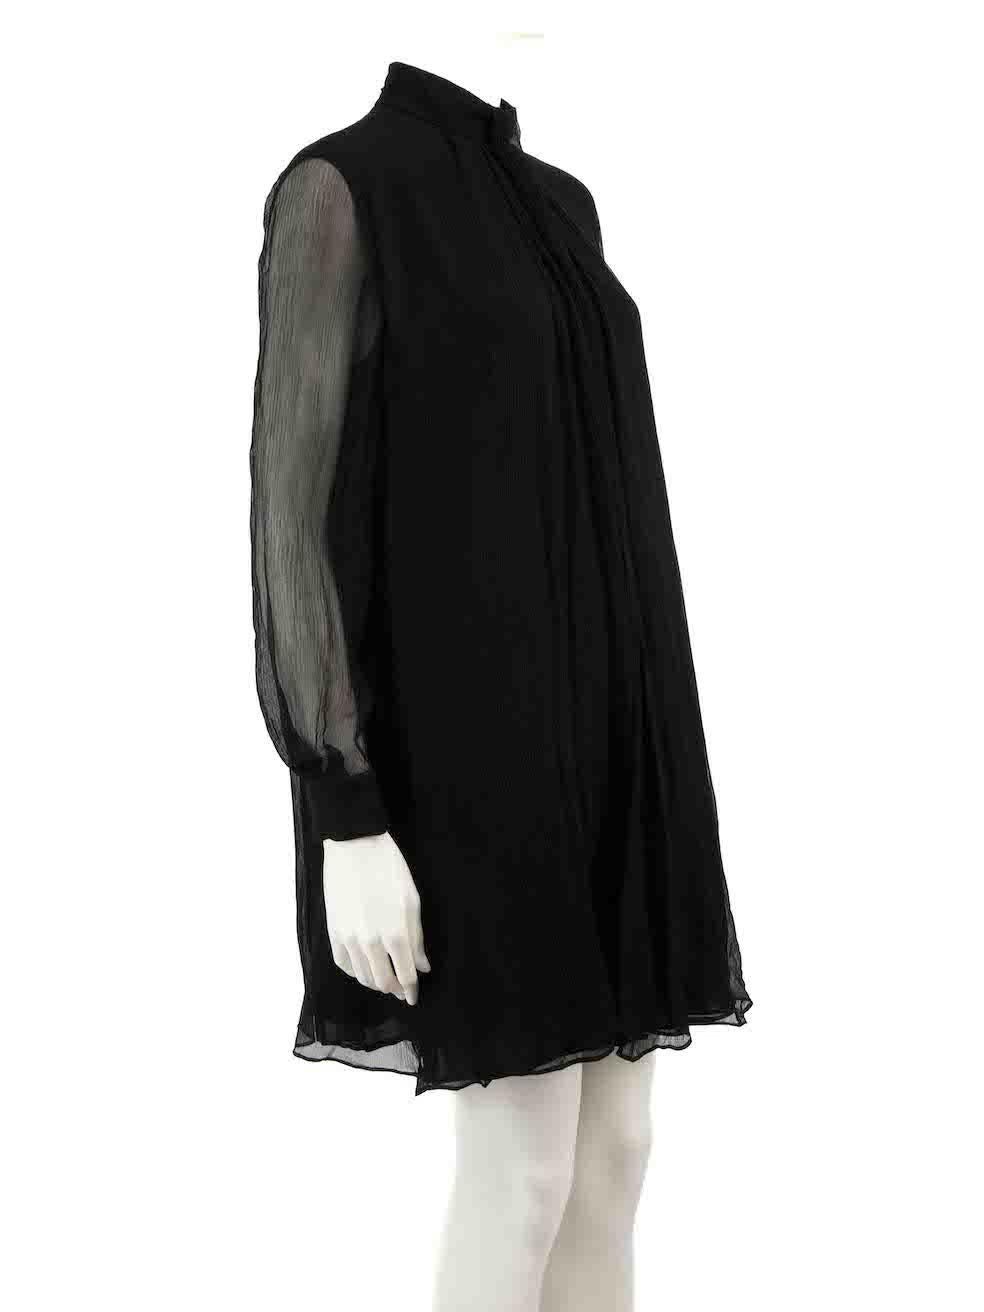 CONDITION is Very good. Minimal wear to dress is evident. Minimal wear to the left shoulder with a light mark and there are plucks to the weave at the front and back on this used Alexander McQueen designer resale item.
 
 
 
 Details
 
 
 Black
 
